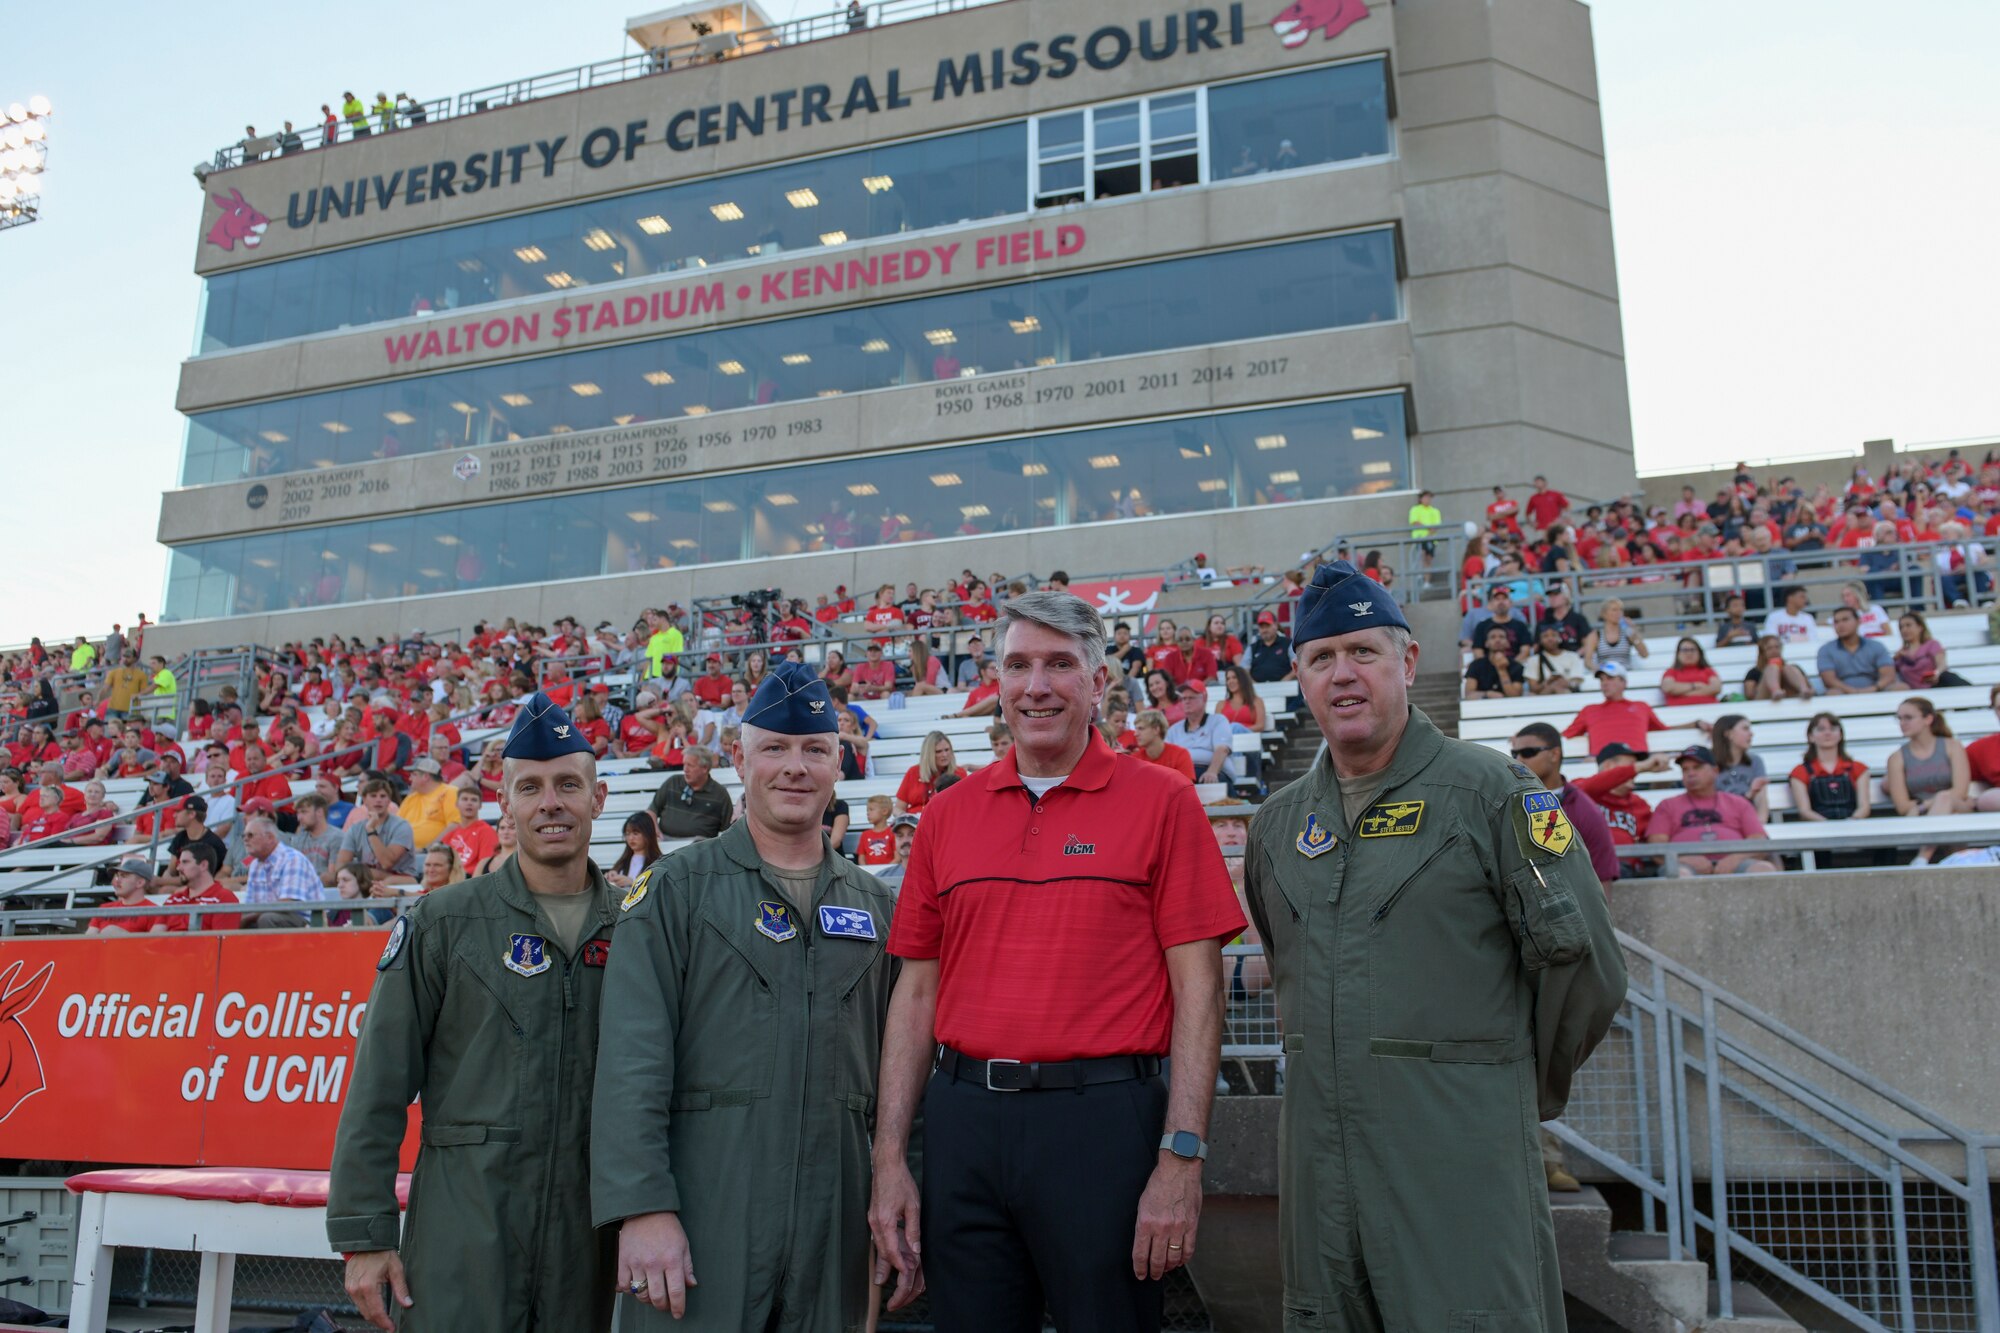 Whiteman Air Force Base wing commanders from the 509th and 131st Bomb Wings and the 442nd Fighter Wing, pose for a photo with Dr. Roger Best, University of Central Missouri president, prior to the UCM Military Appreciation football game, Sept. 8, 2022, in Warrensburg, Missouri. Whiteman AFB and UCM share a valuable community partnership that fosters a supportive relationship between the base and local communities. (U.S. Air Force photo by Tech. Sgt. Dylan Nuckolls)